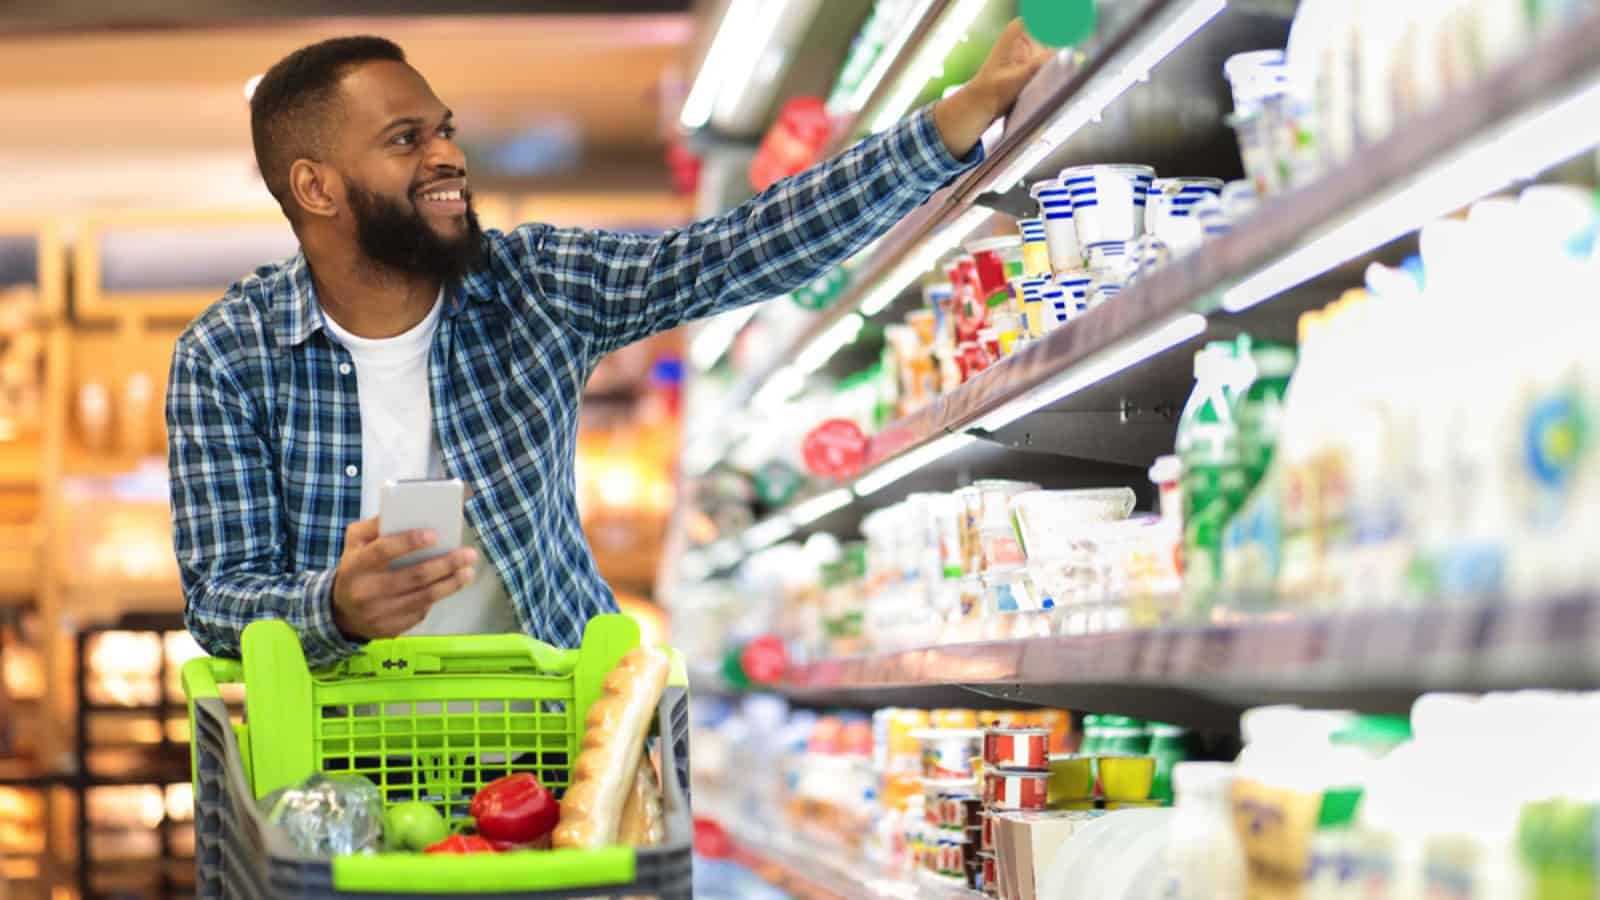 Man checking out an item at grocery store